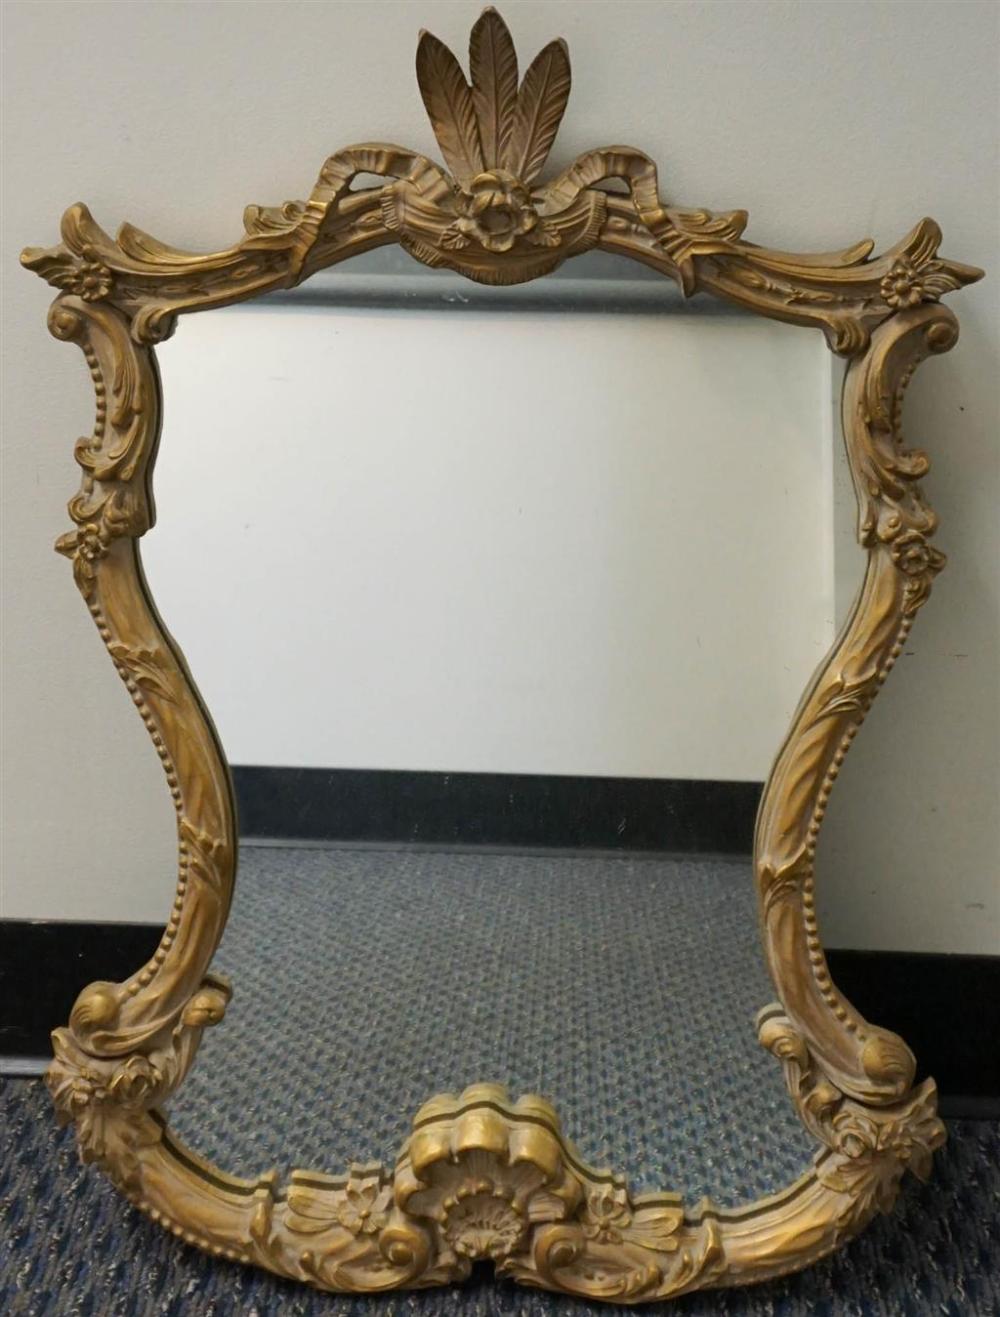 LOUIS XV STYLE GILT DECORATED FRAME 326bca